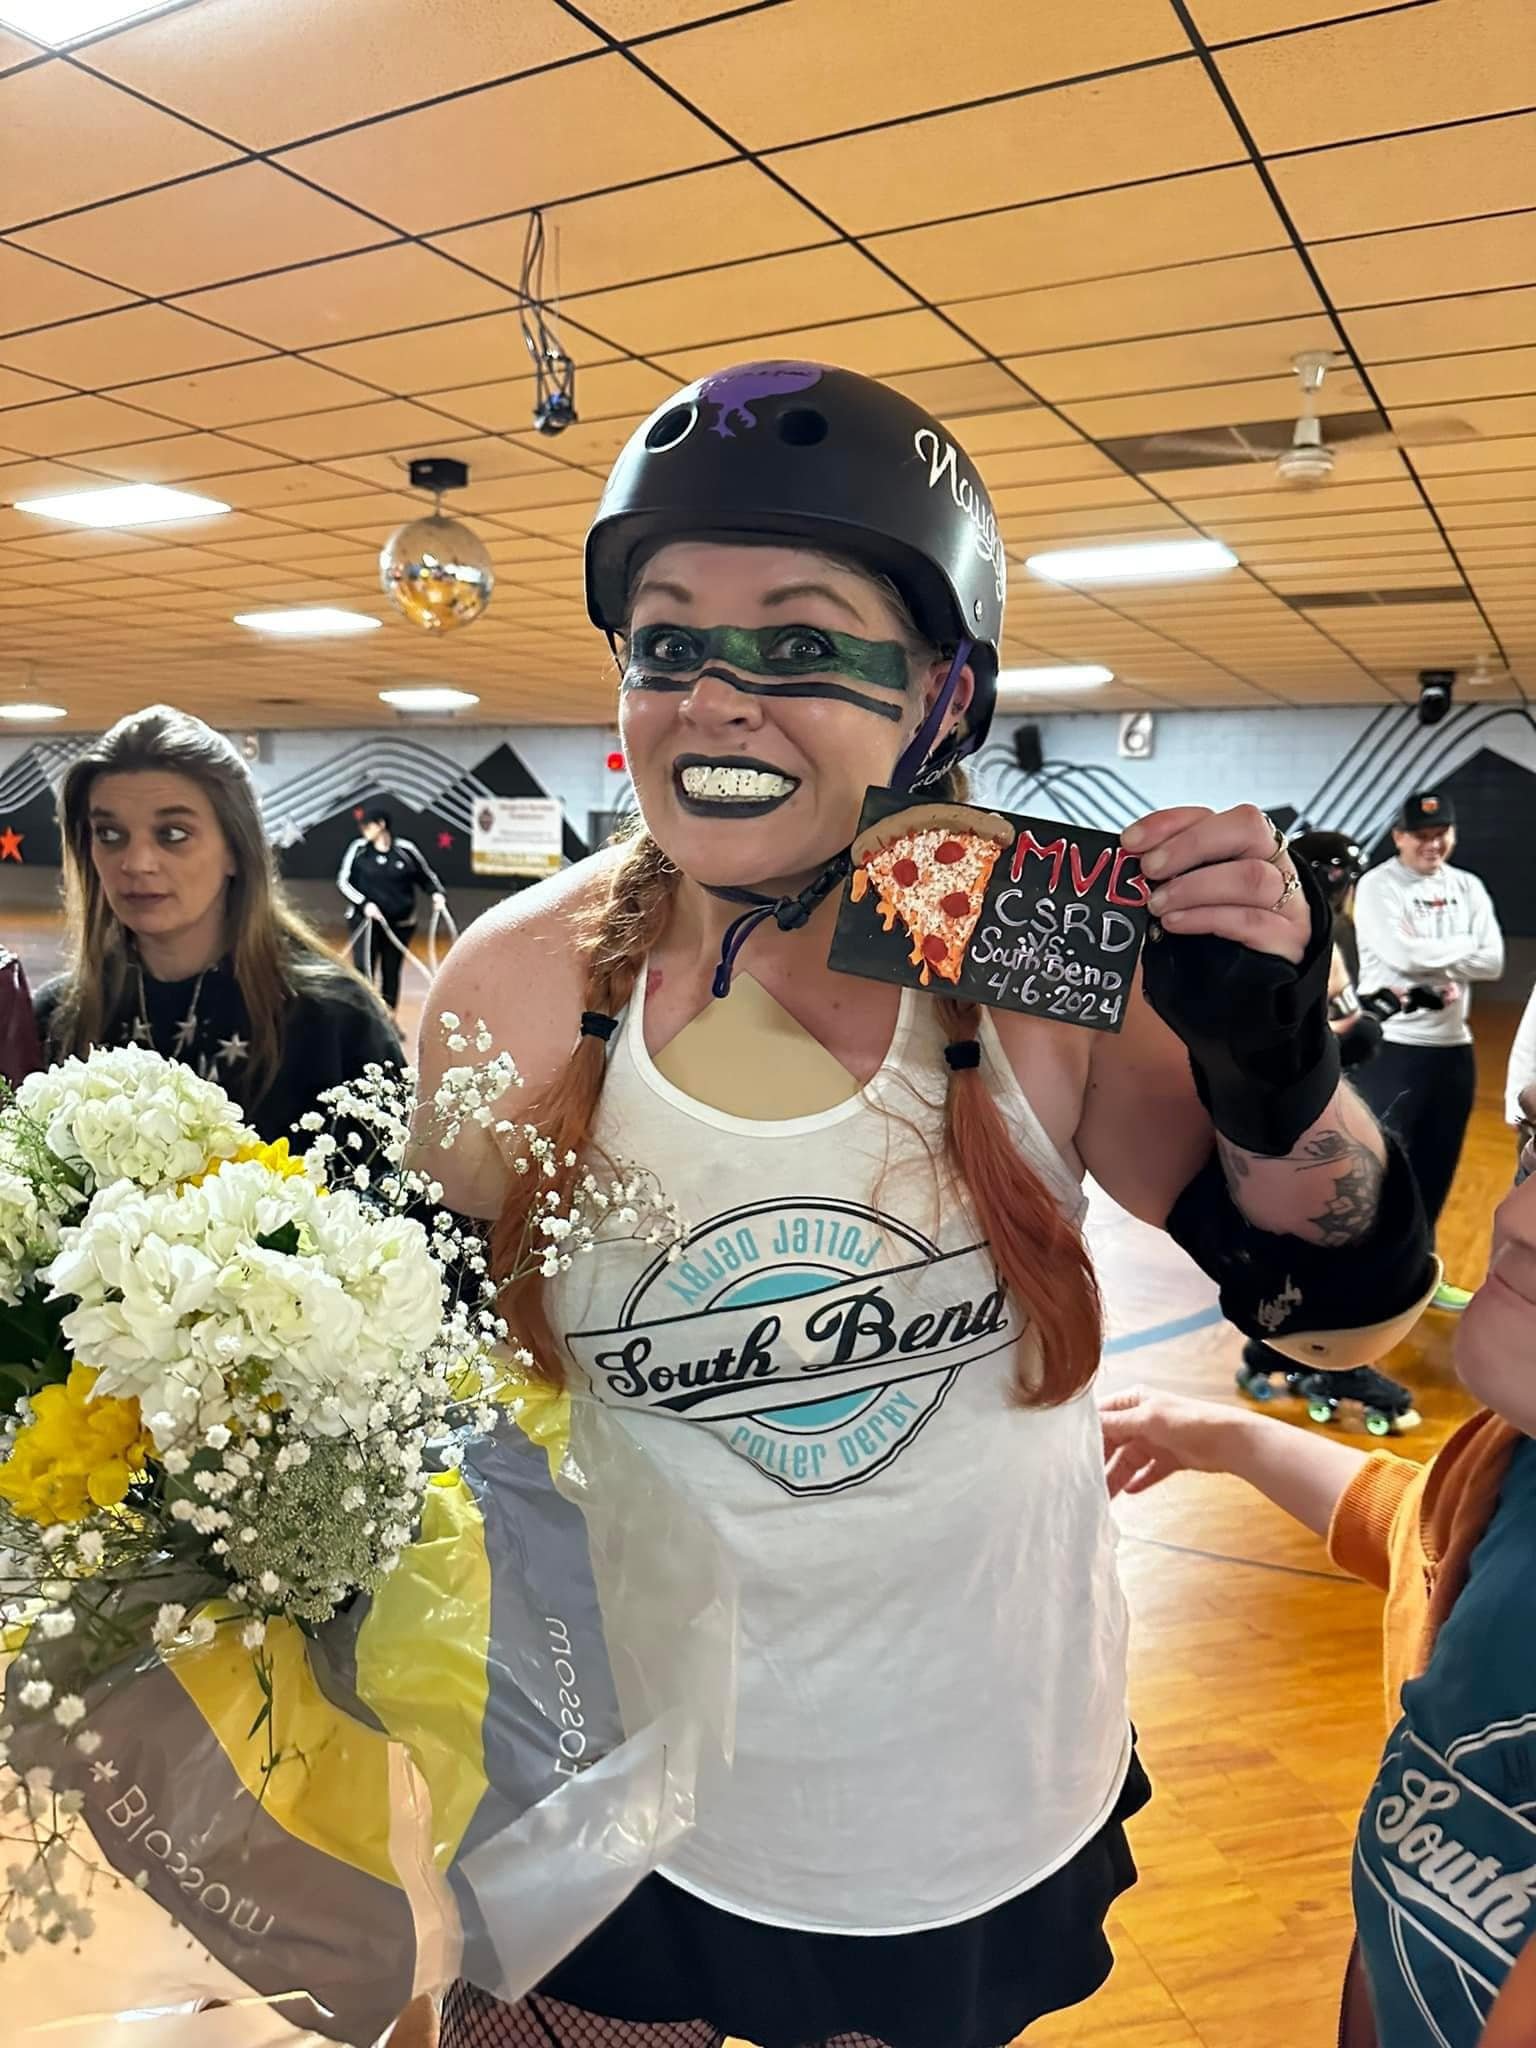 South Bend Roller Derby would like to wish a very Happy Birthday to #777, Naughty Nelson. 

We hope you have a wonderful day today!